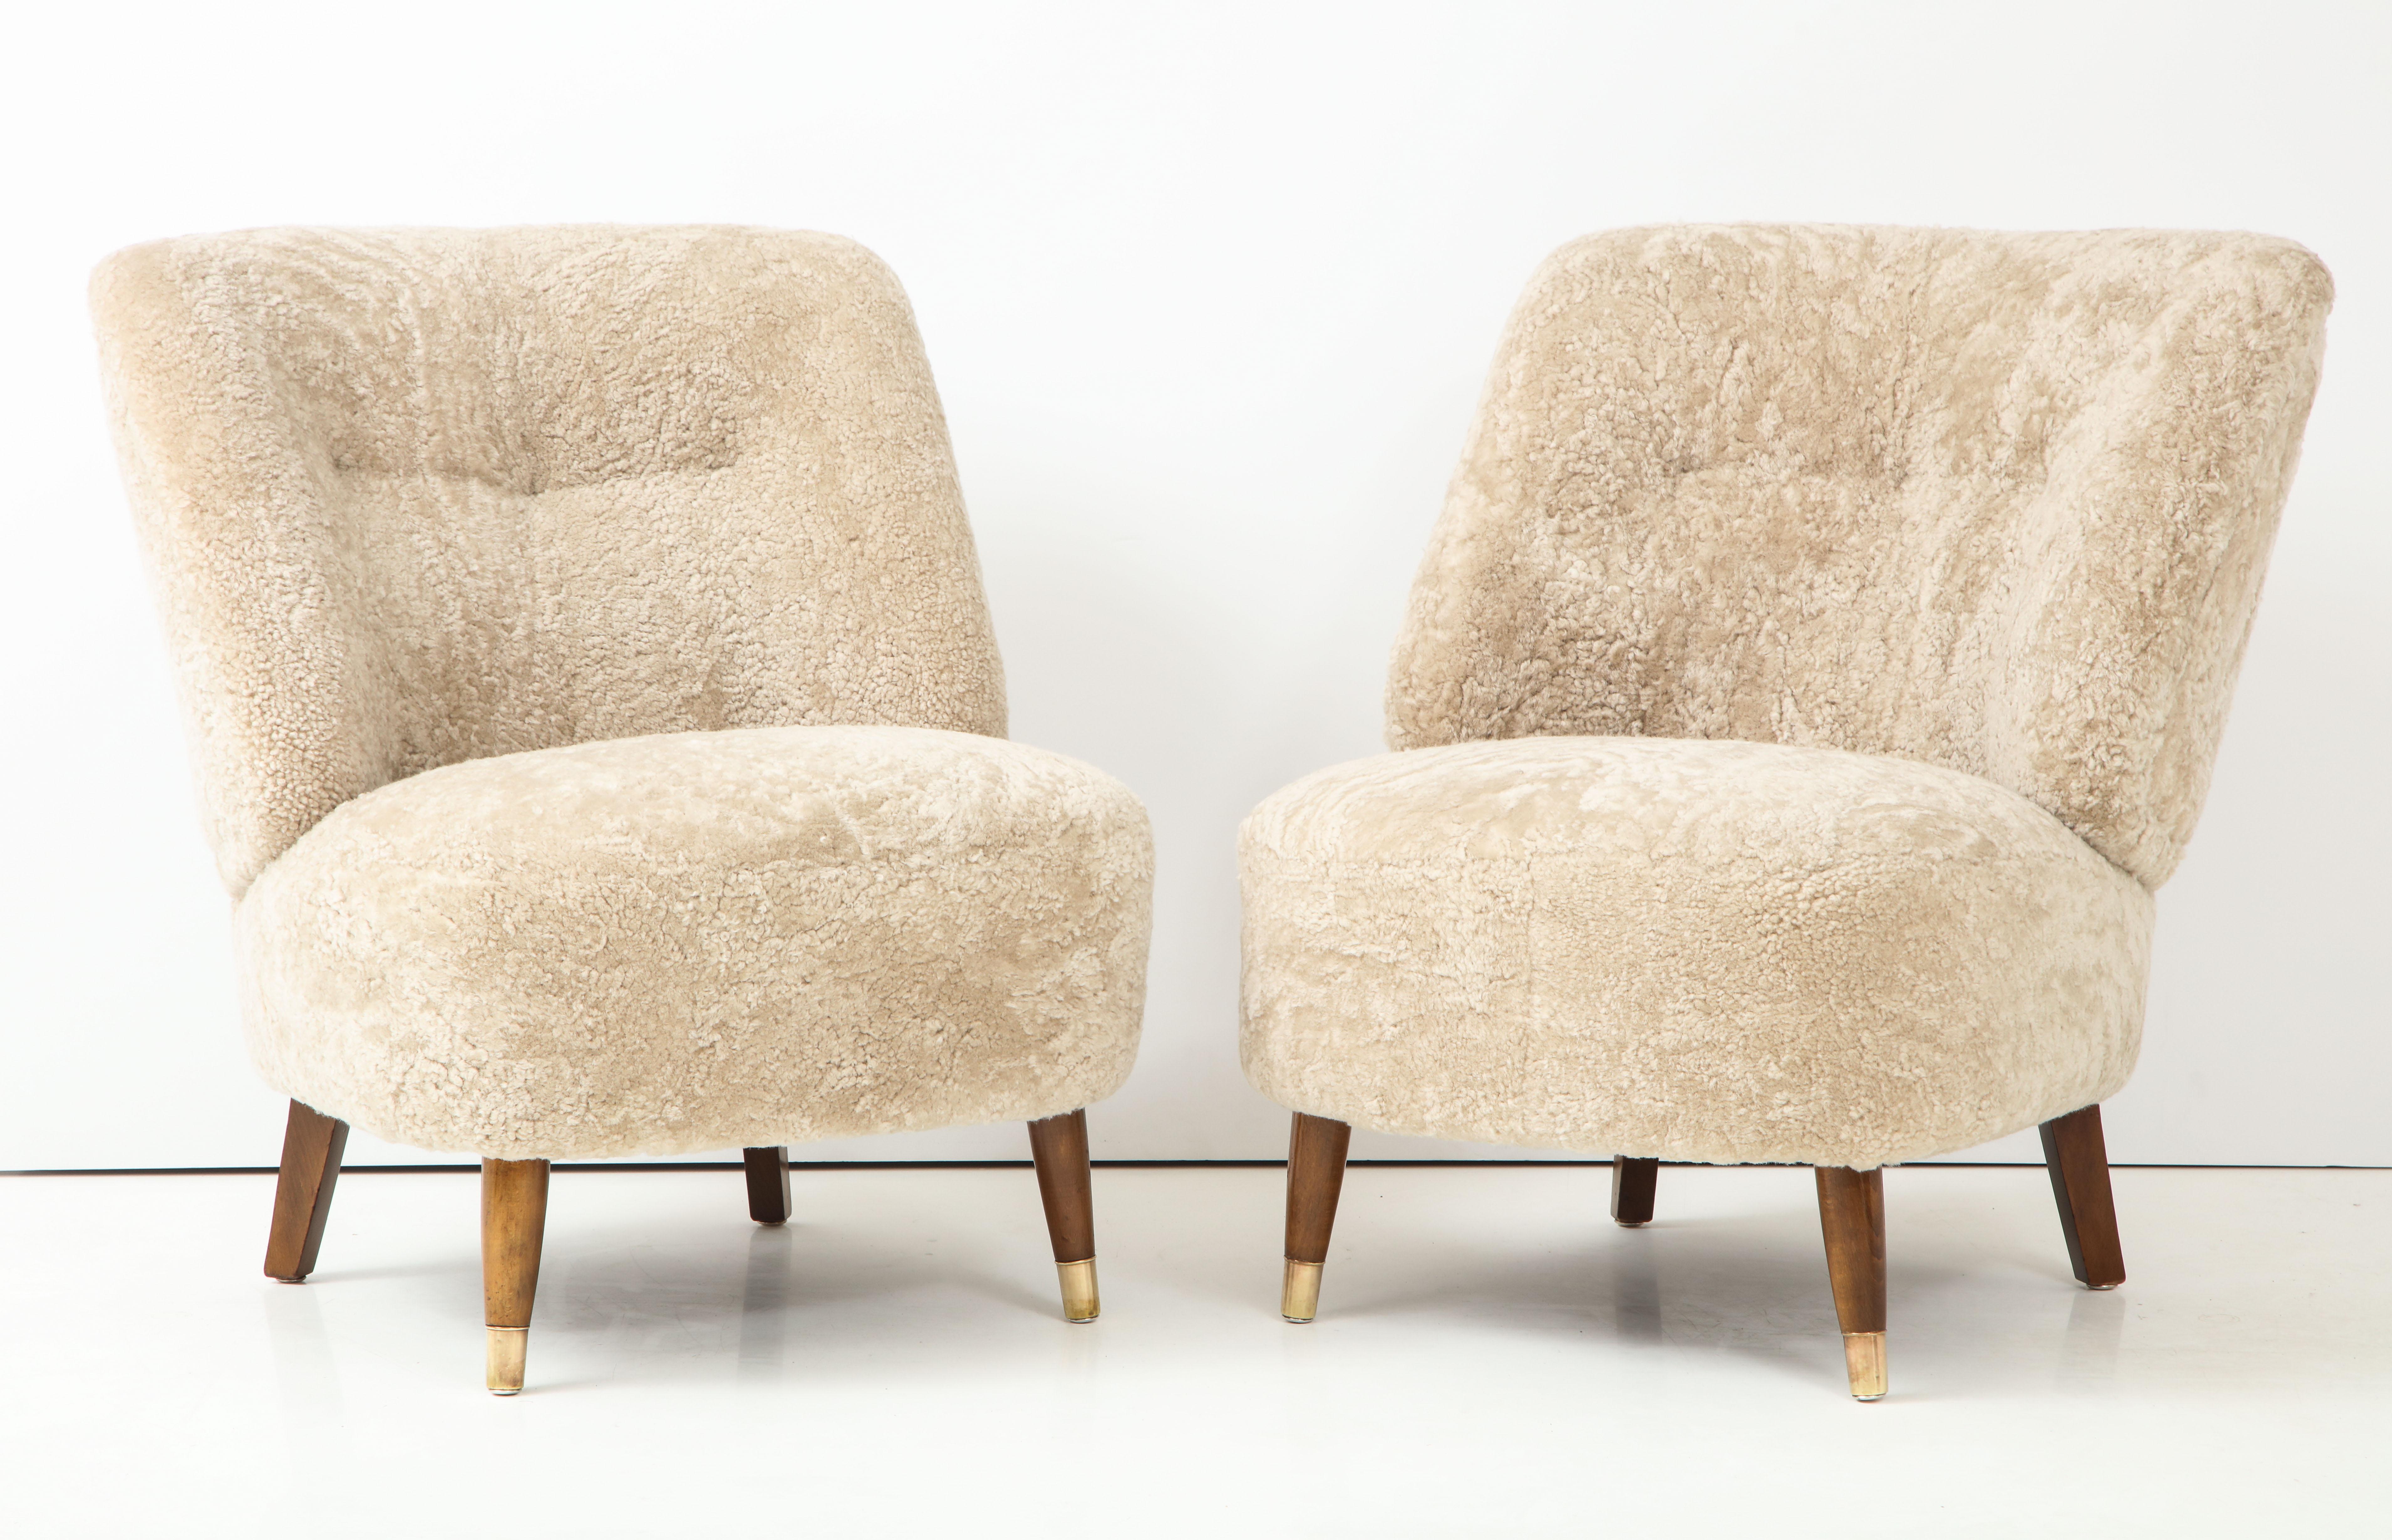 A pair of Danish sheepskin upholstered chairs, circa 1930s, each with a generous slightly curved backrest, full seat raised on turned beechwood legs ending with brass sabots. New Swedish Gottland sheepskin. Great scale and comfort.